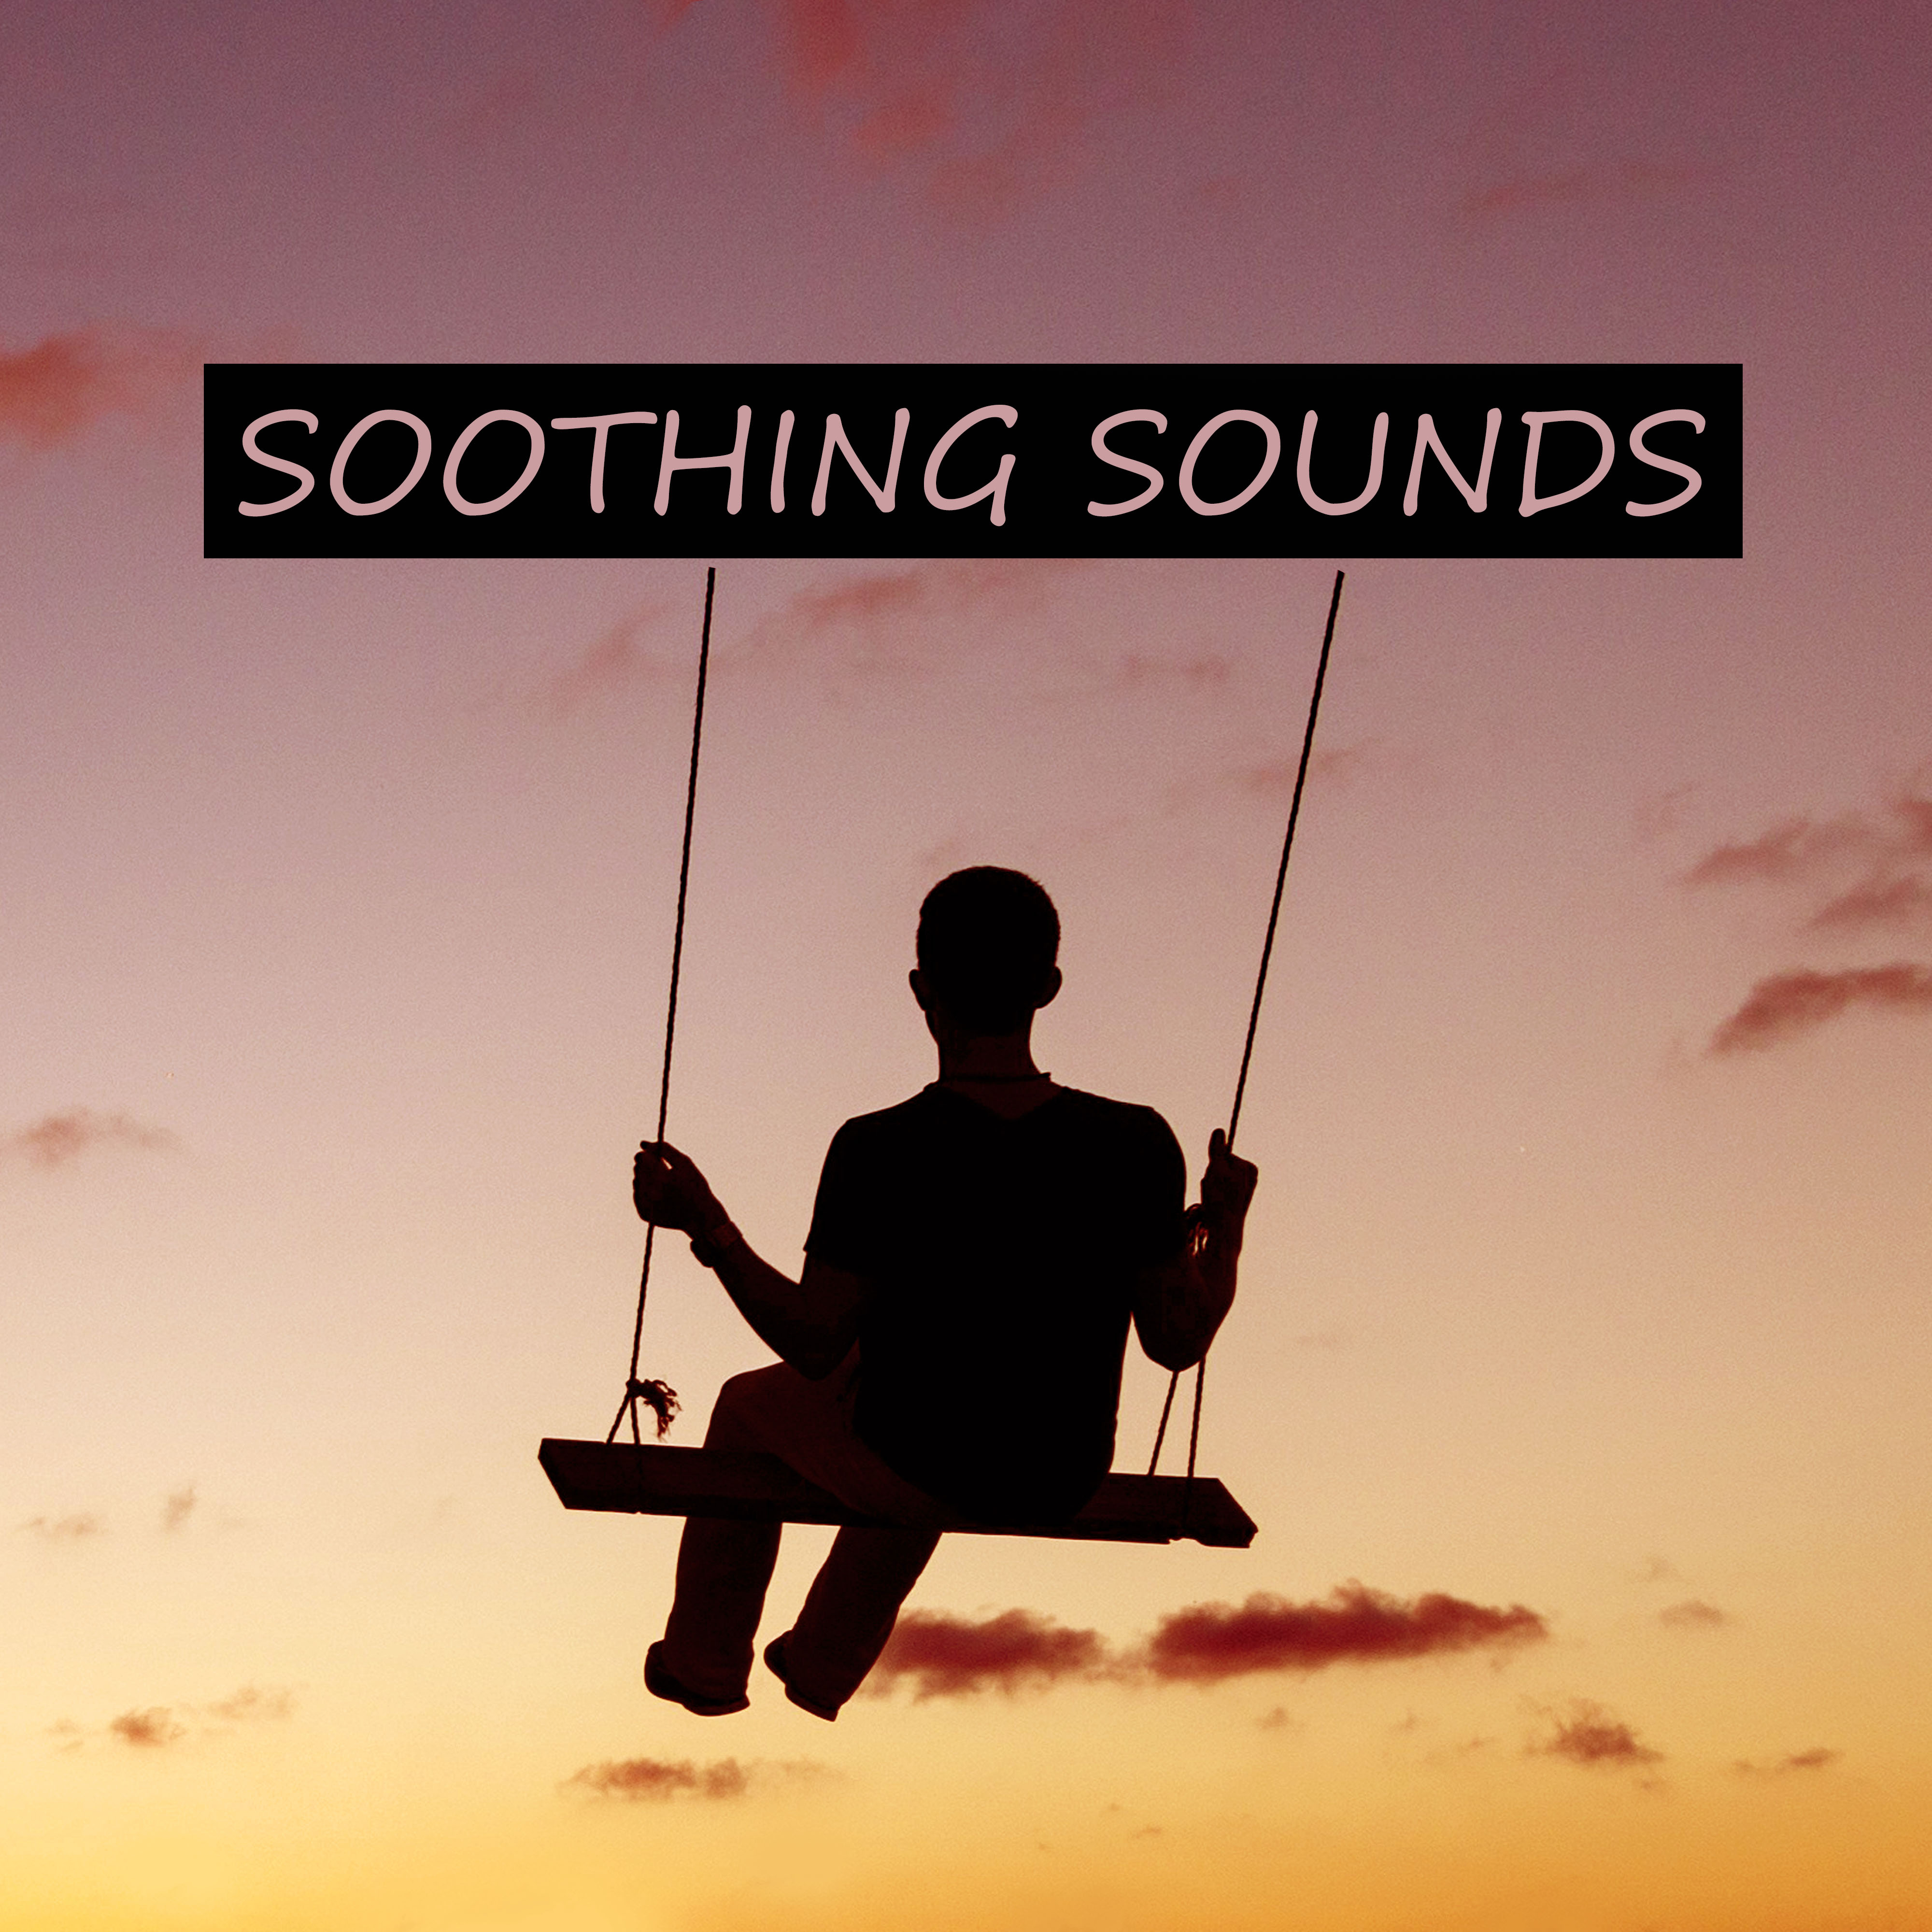 Soothing Sounds – Take Your Time, Nature Sounds to Relax, Yoga & Tai Chi Deep Relaxation